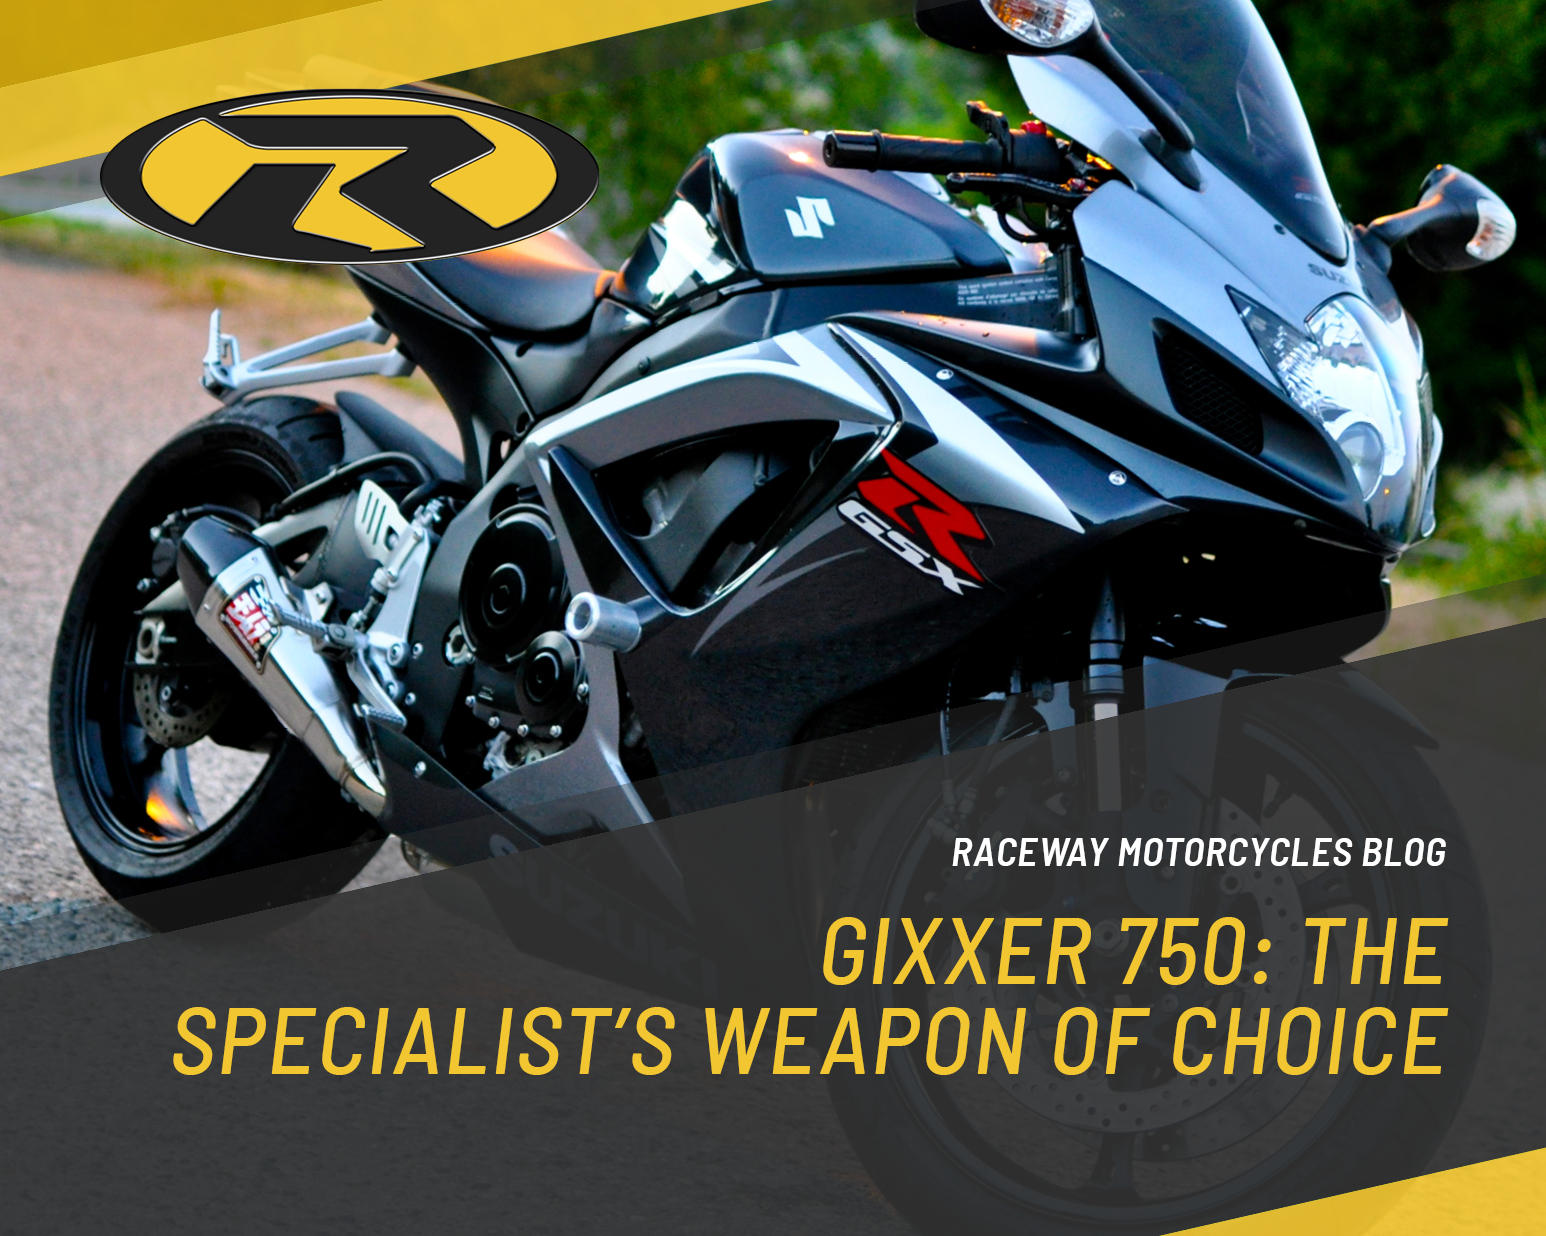 Gixxer 750: The Specialist’s Weapon Of Choice